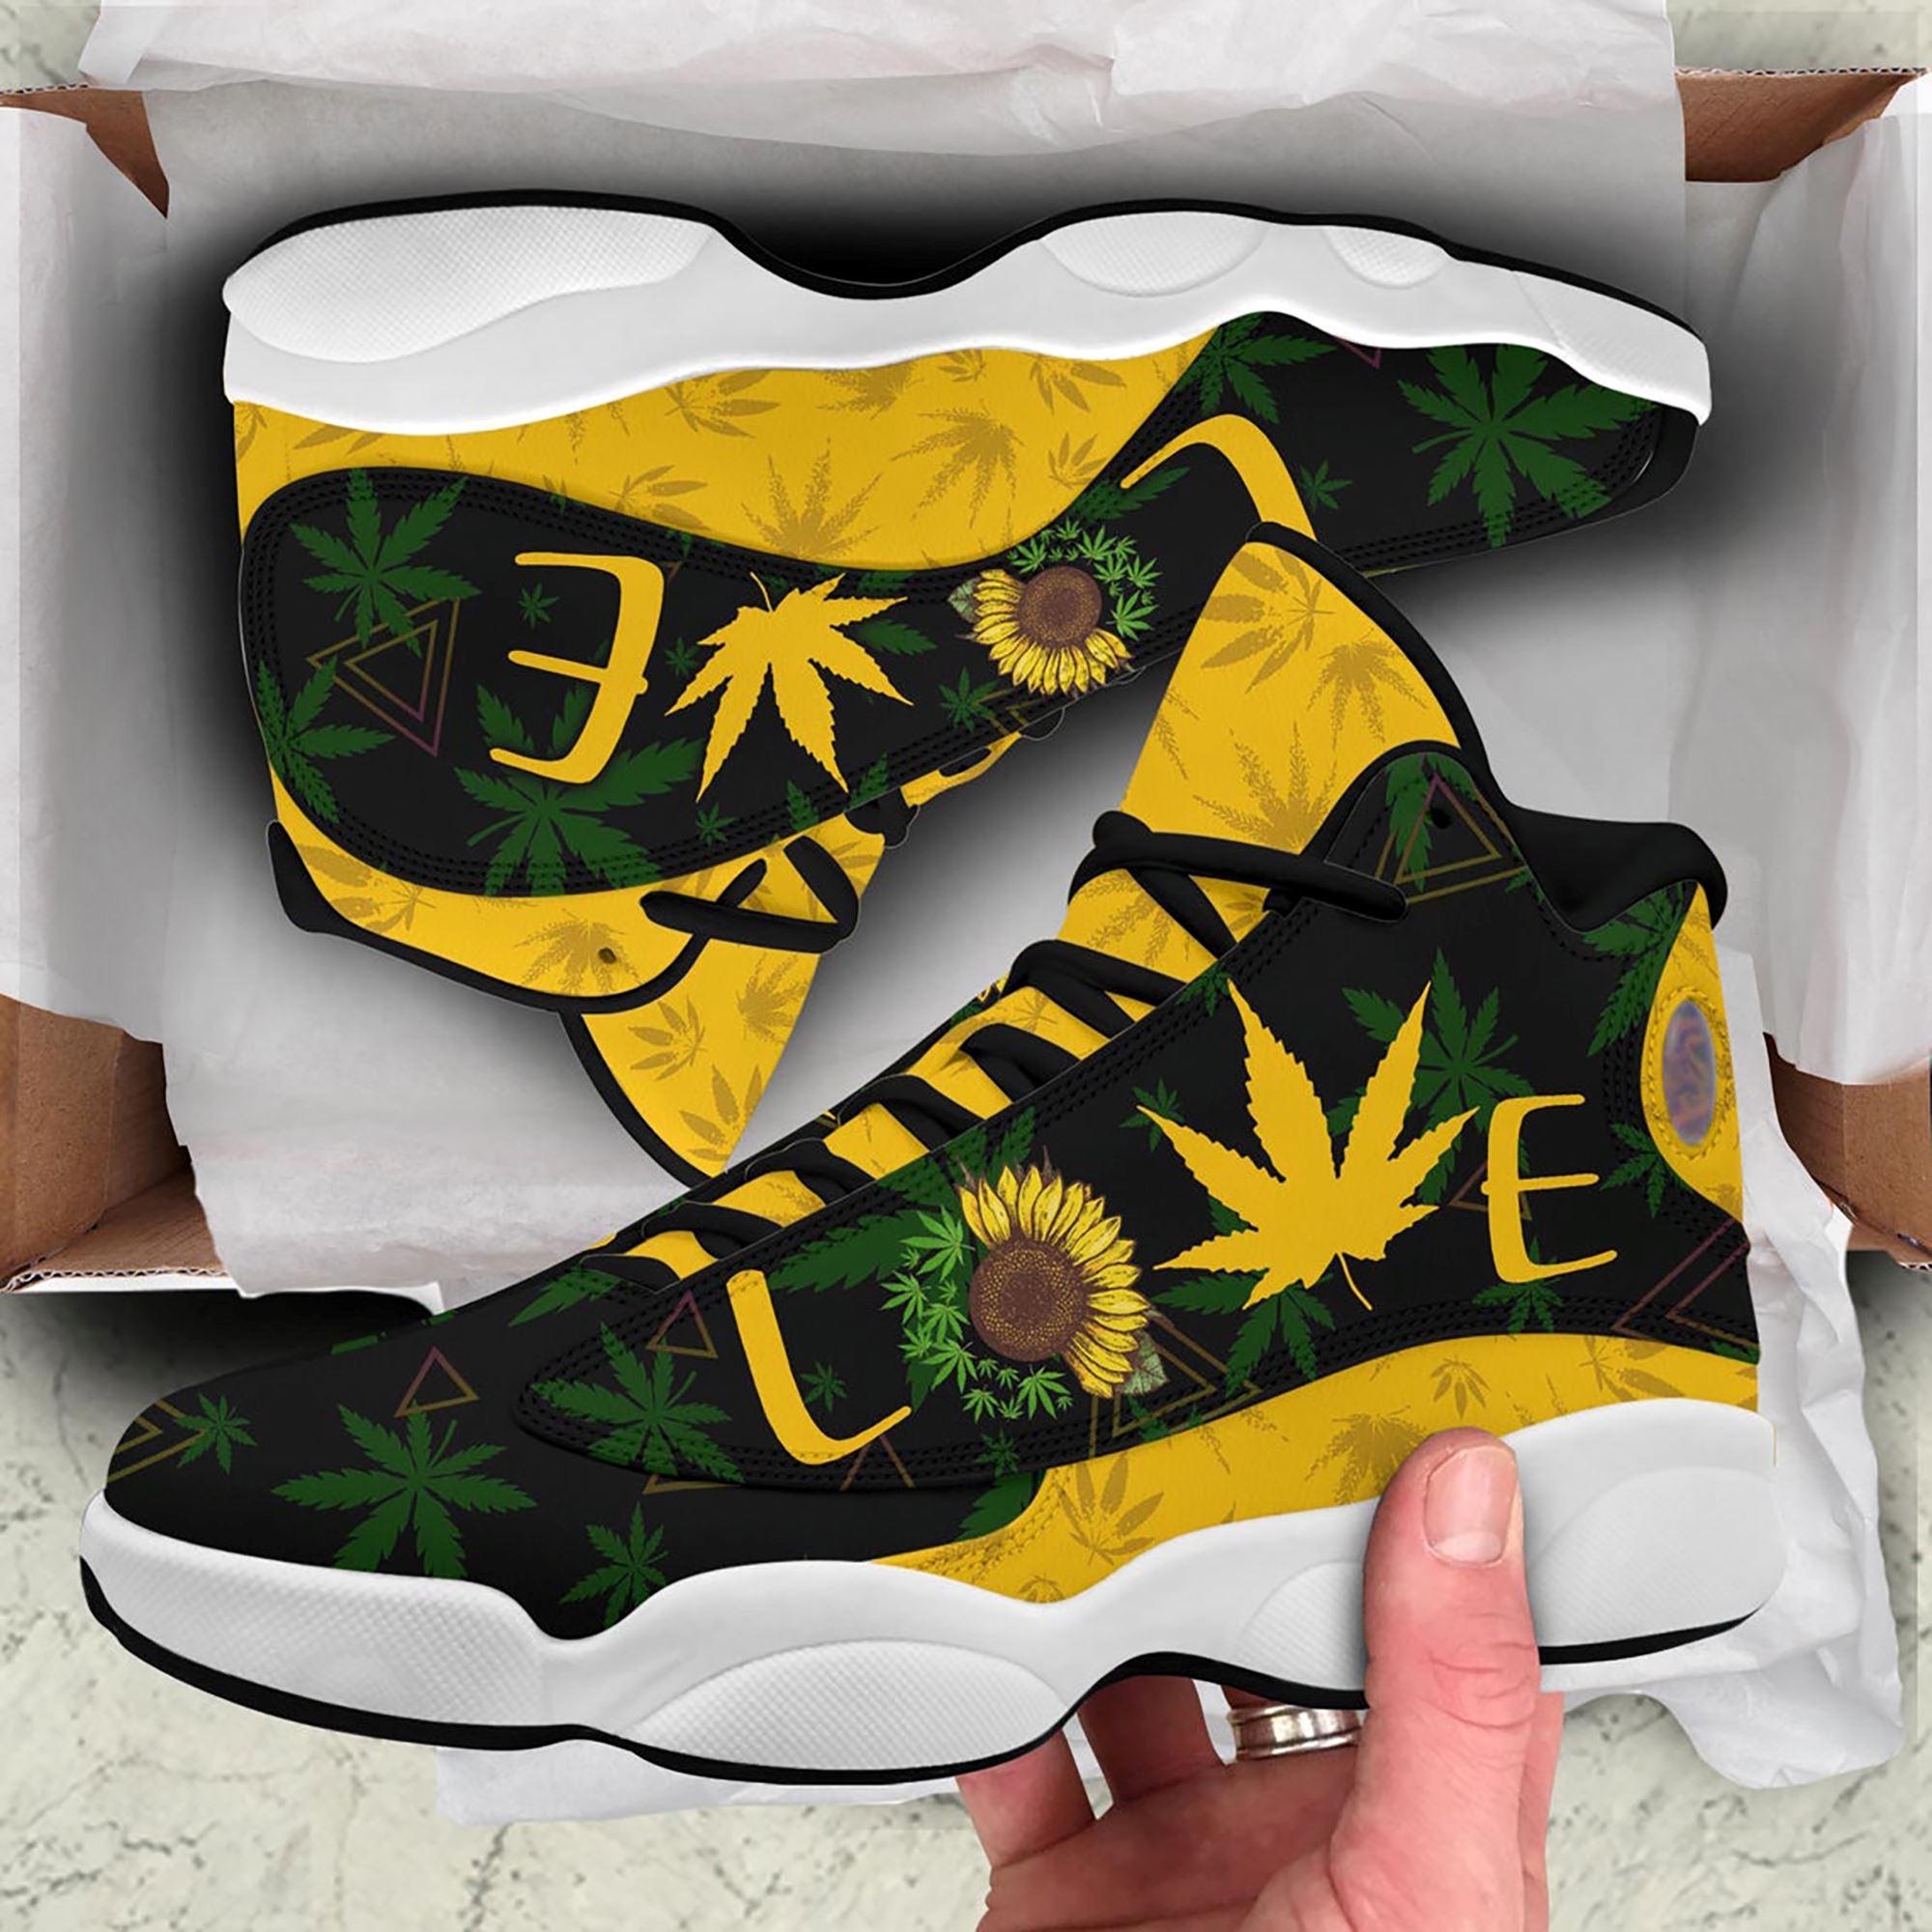 Cannabis Weed Sunflower Love Air Jordan 13 Sneakers Shoes For Men And Women Air Jd13 Shoes Cannabis Psychedelic Marijuana Lover